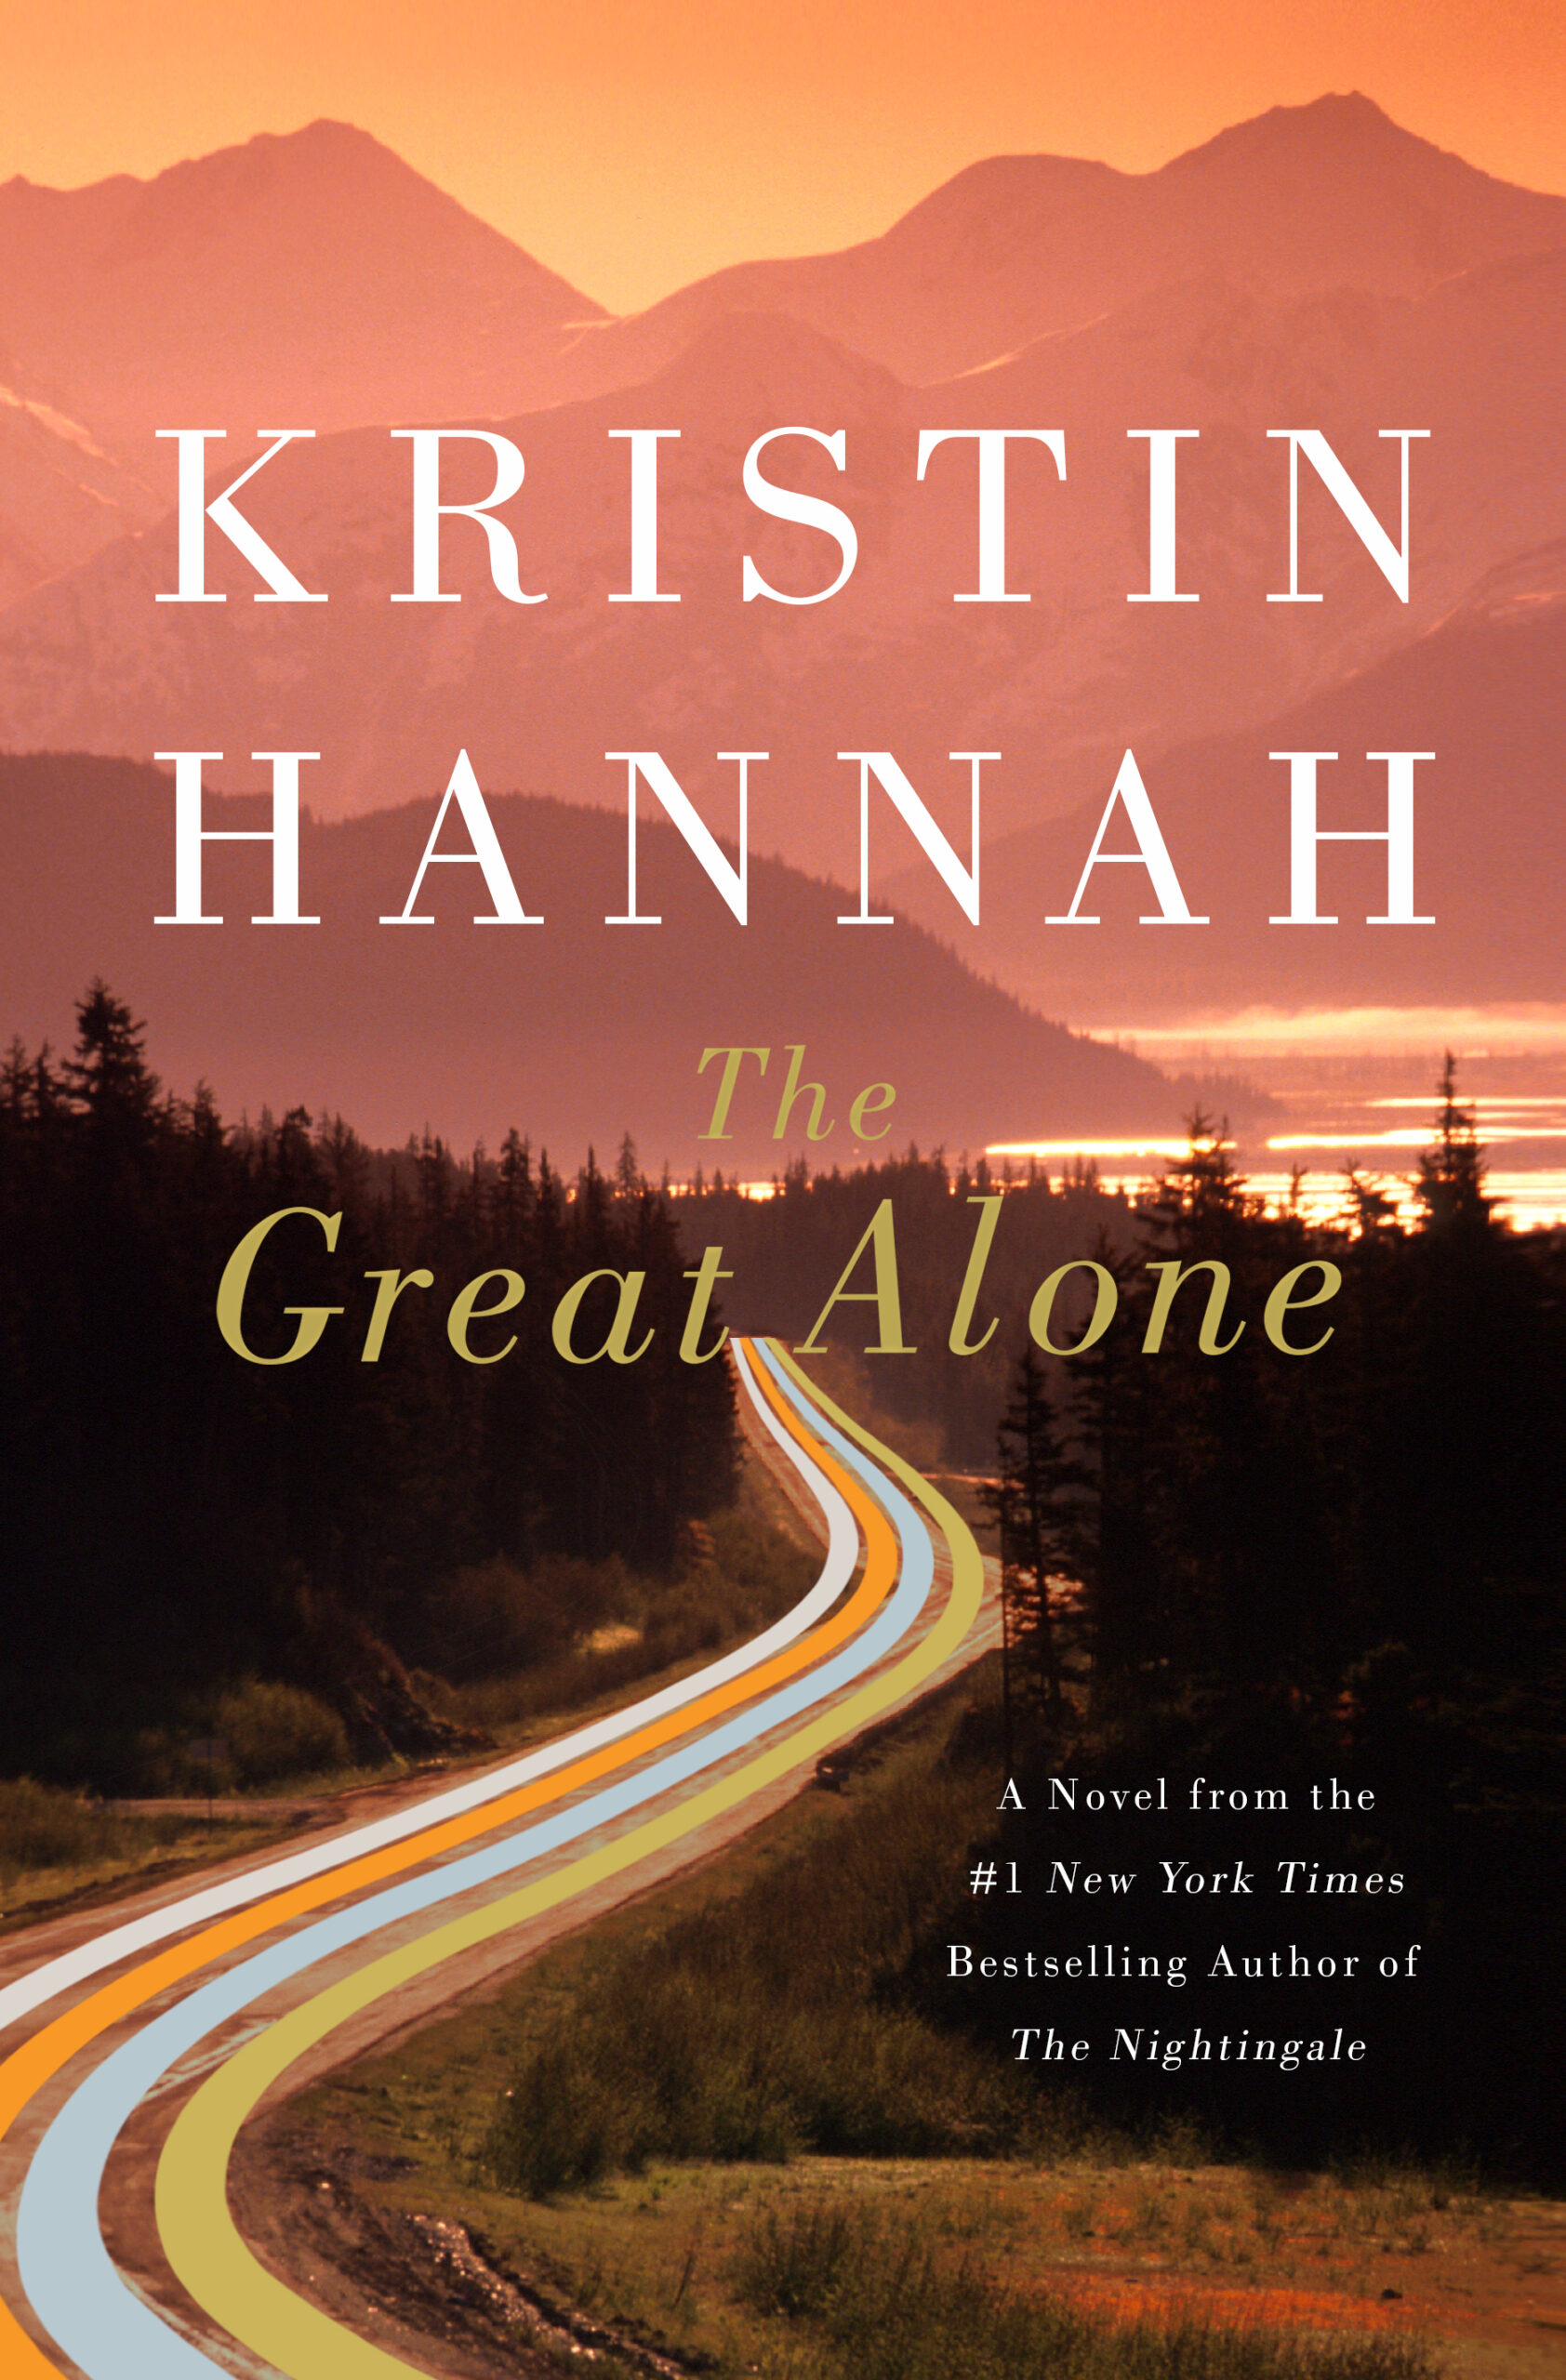 The Great Alone by Kristin Hannah - Must-Read Books For Colleen Hoover’s Readers